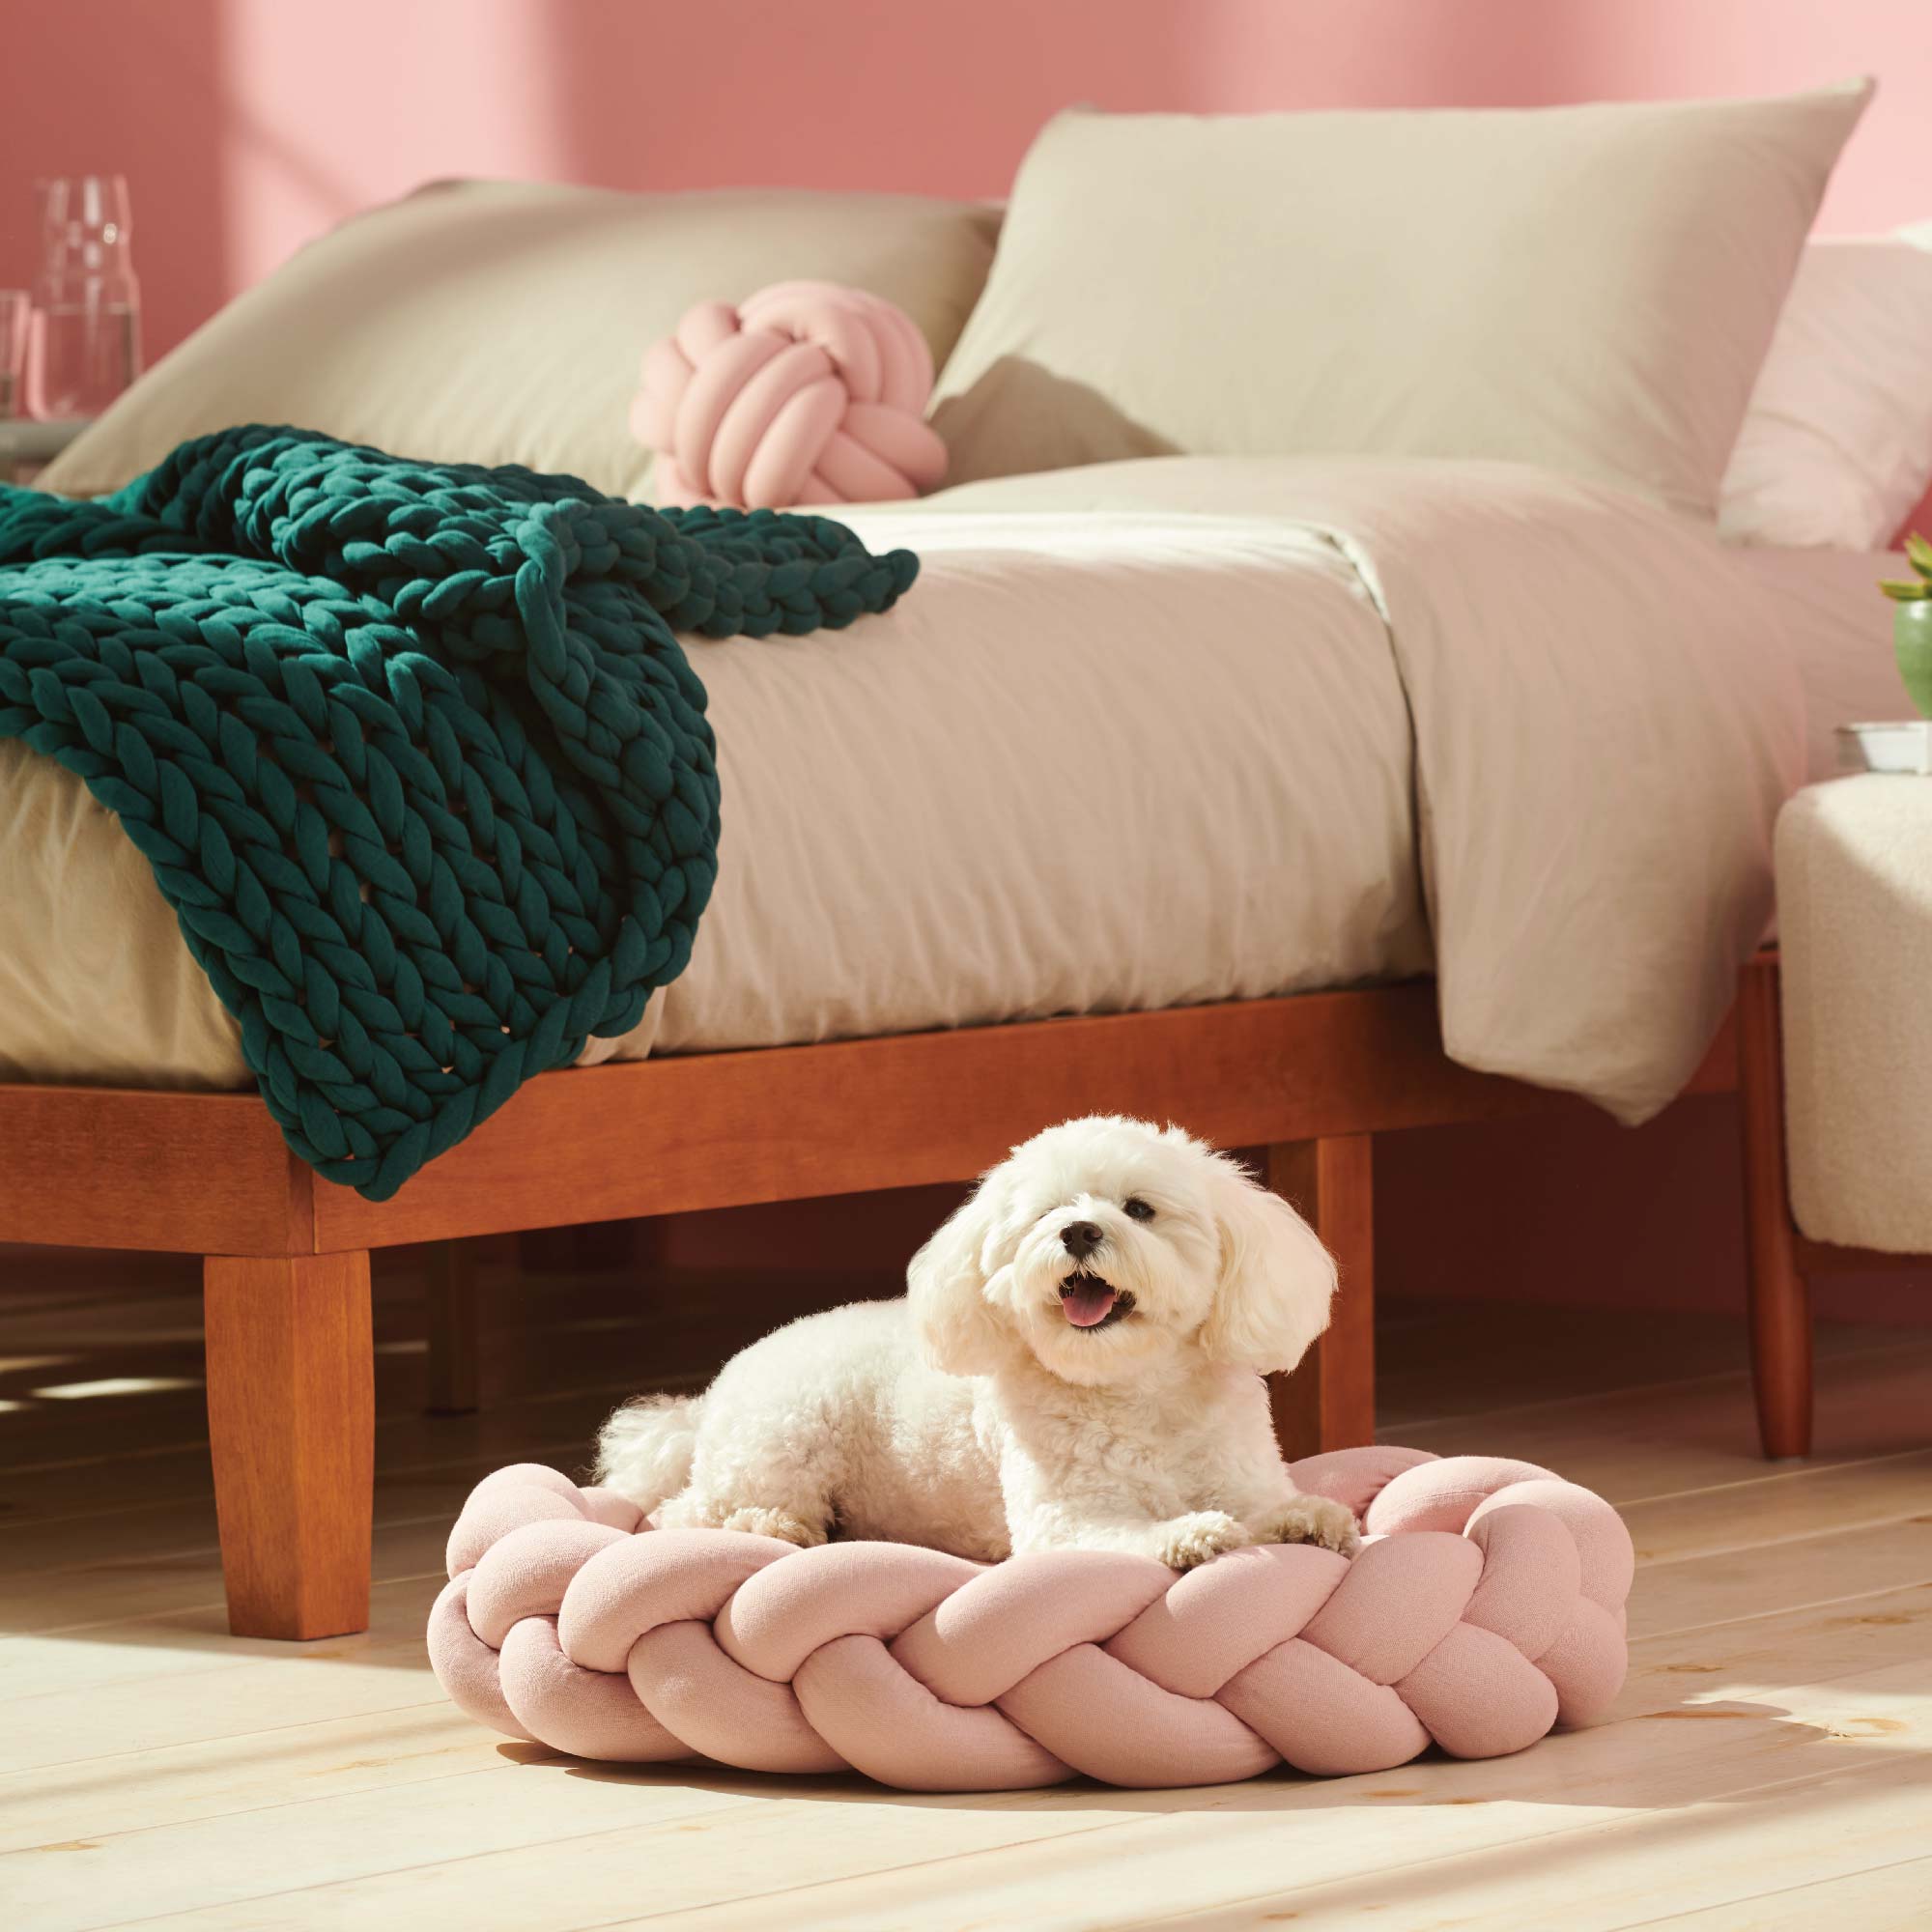 Meet the Pupper Pod: A Pawfectly Soothing Dog Bed